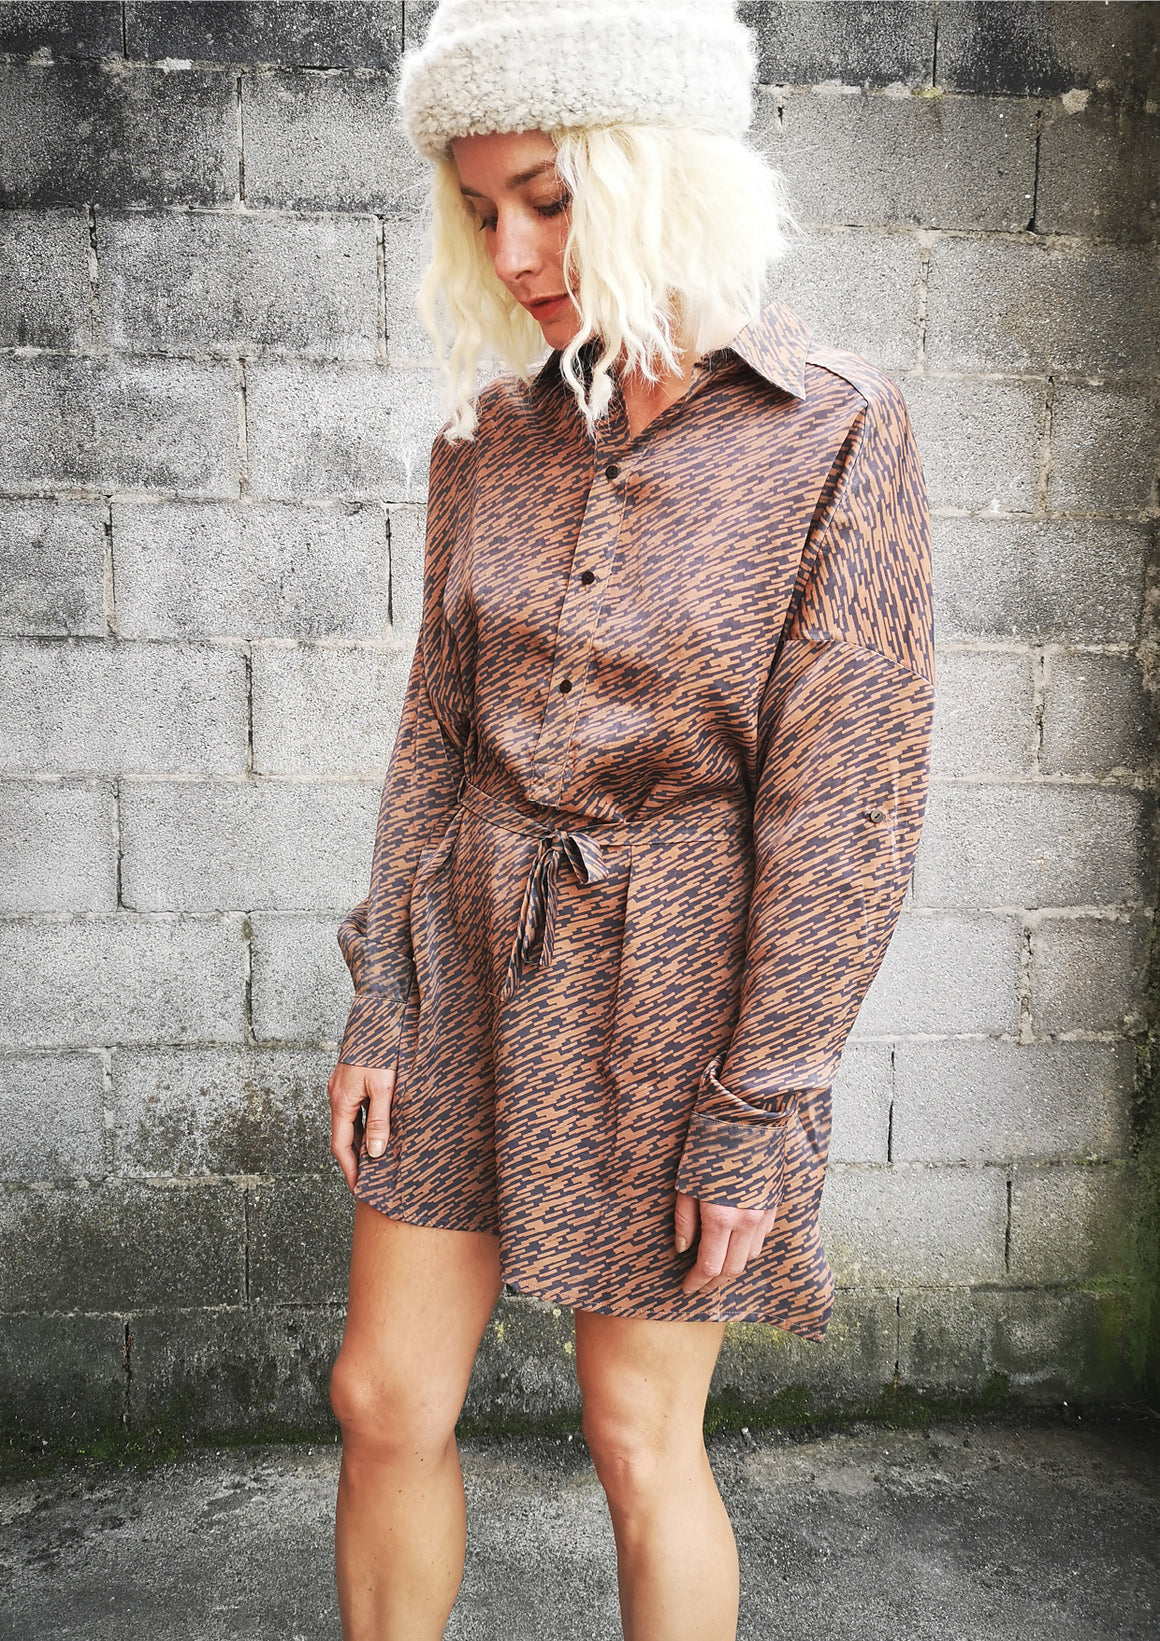 LIMITED EDITION - DRESS WITH BELT - PRINTED CUPRO grey/rust - BERENIK